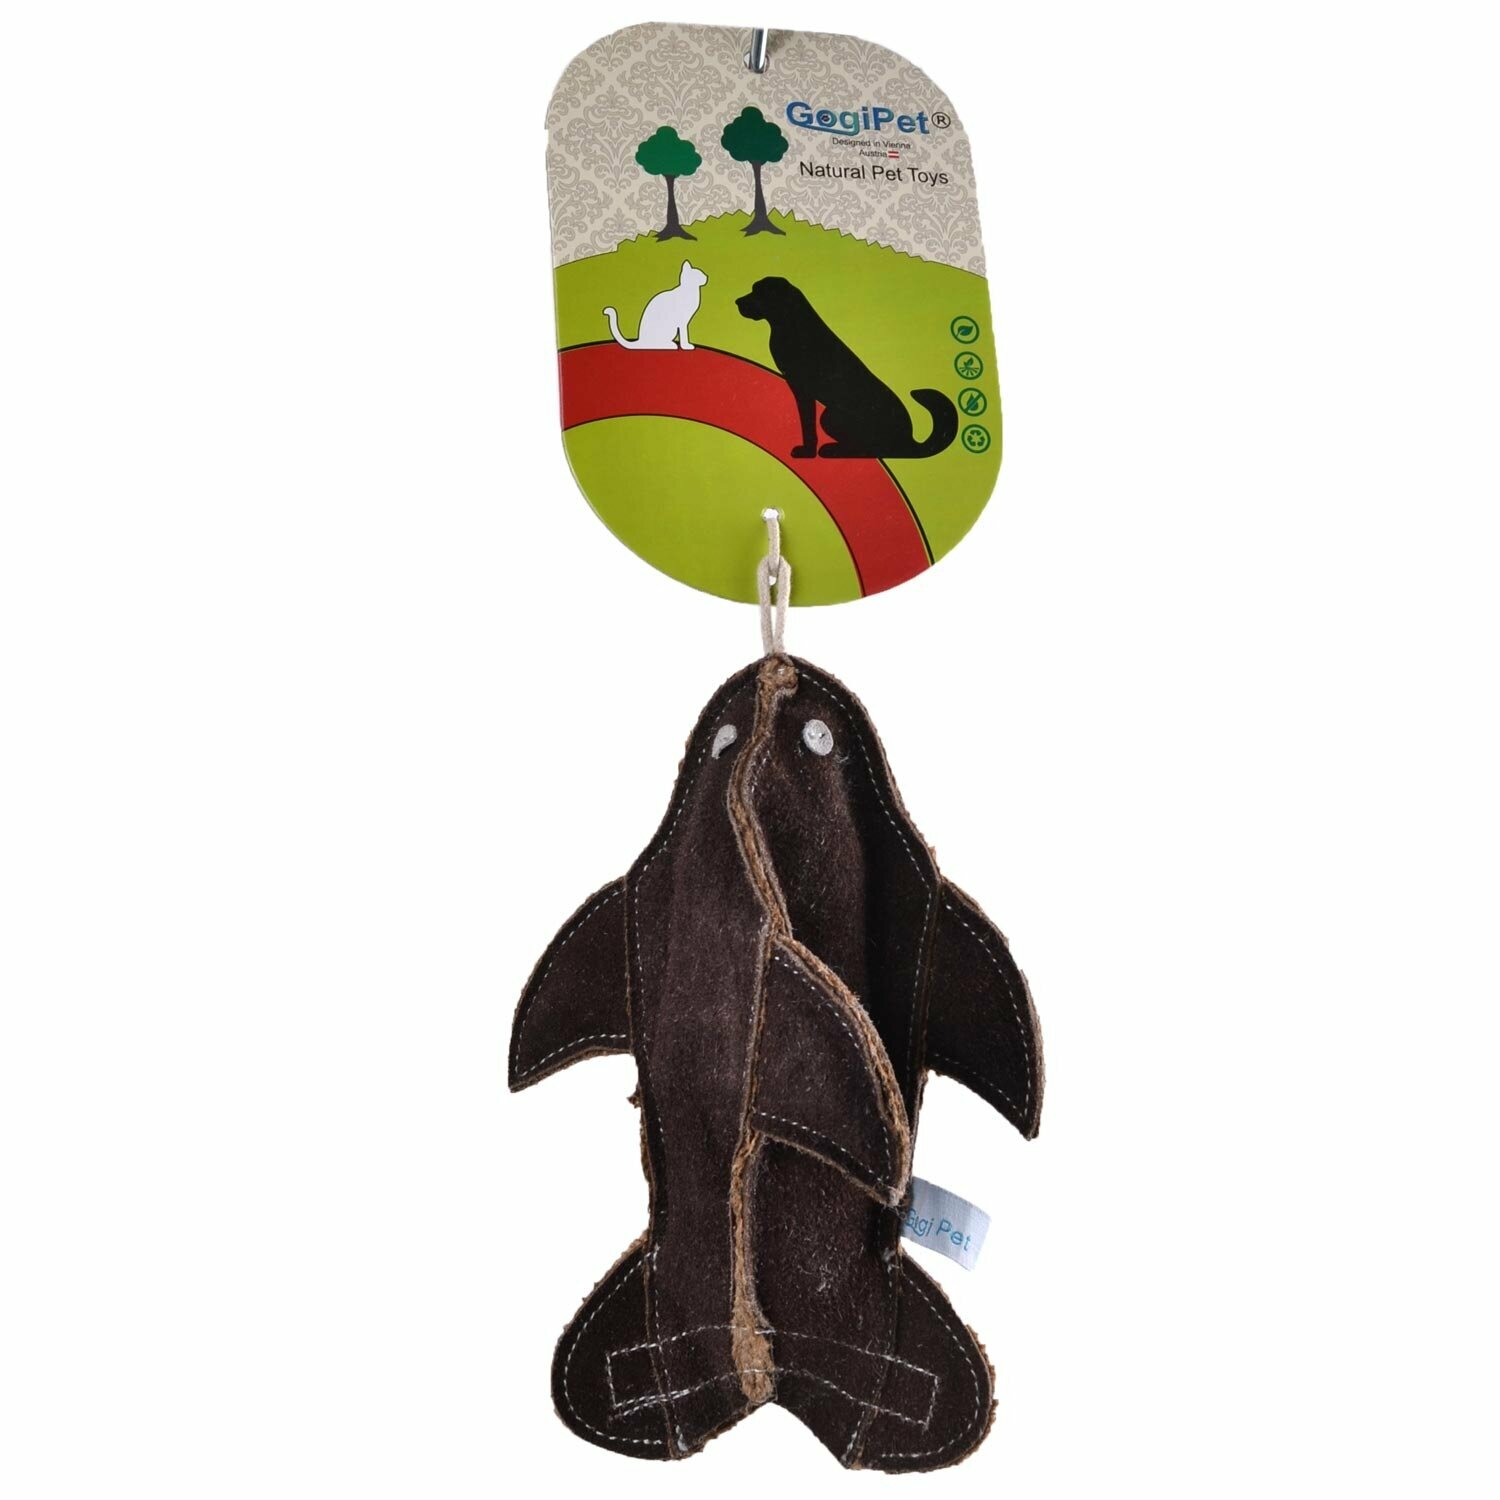 Dolphin dog toy - GogiPet ® Dog toy made of sustainable raw materials